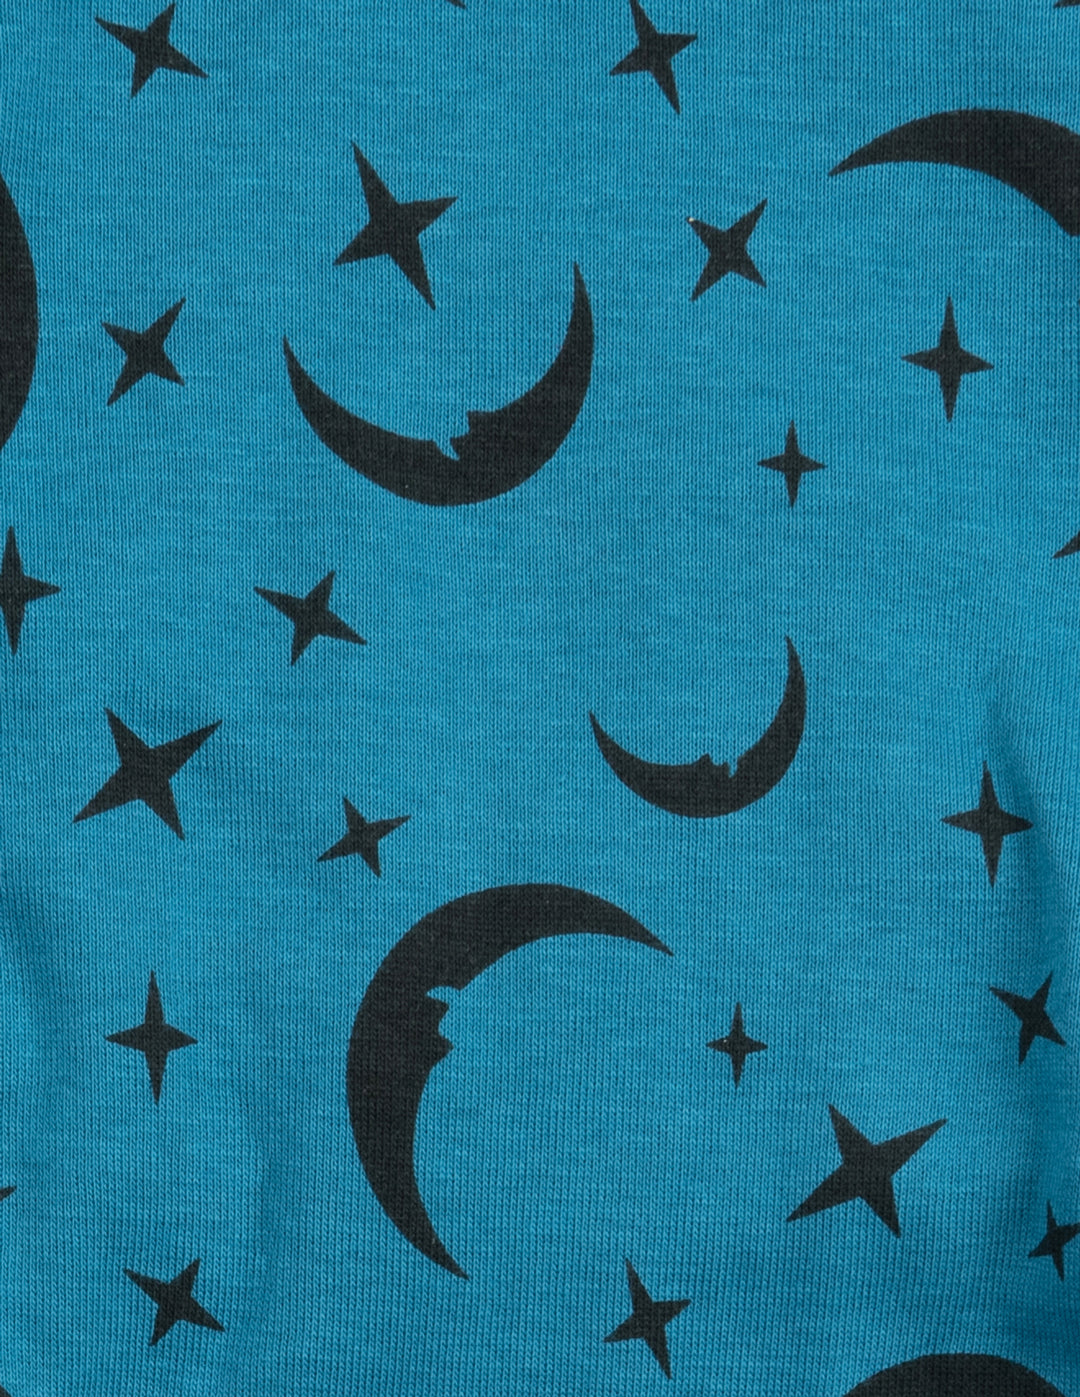 blue moon and stars baby footed cotton pajama